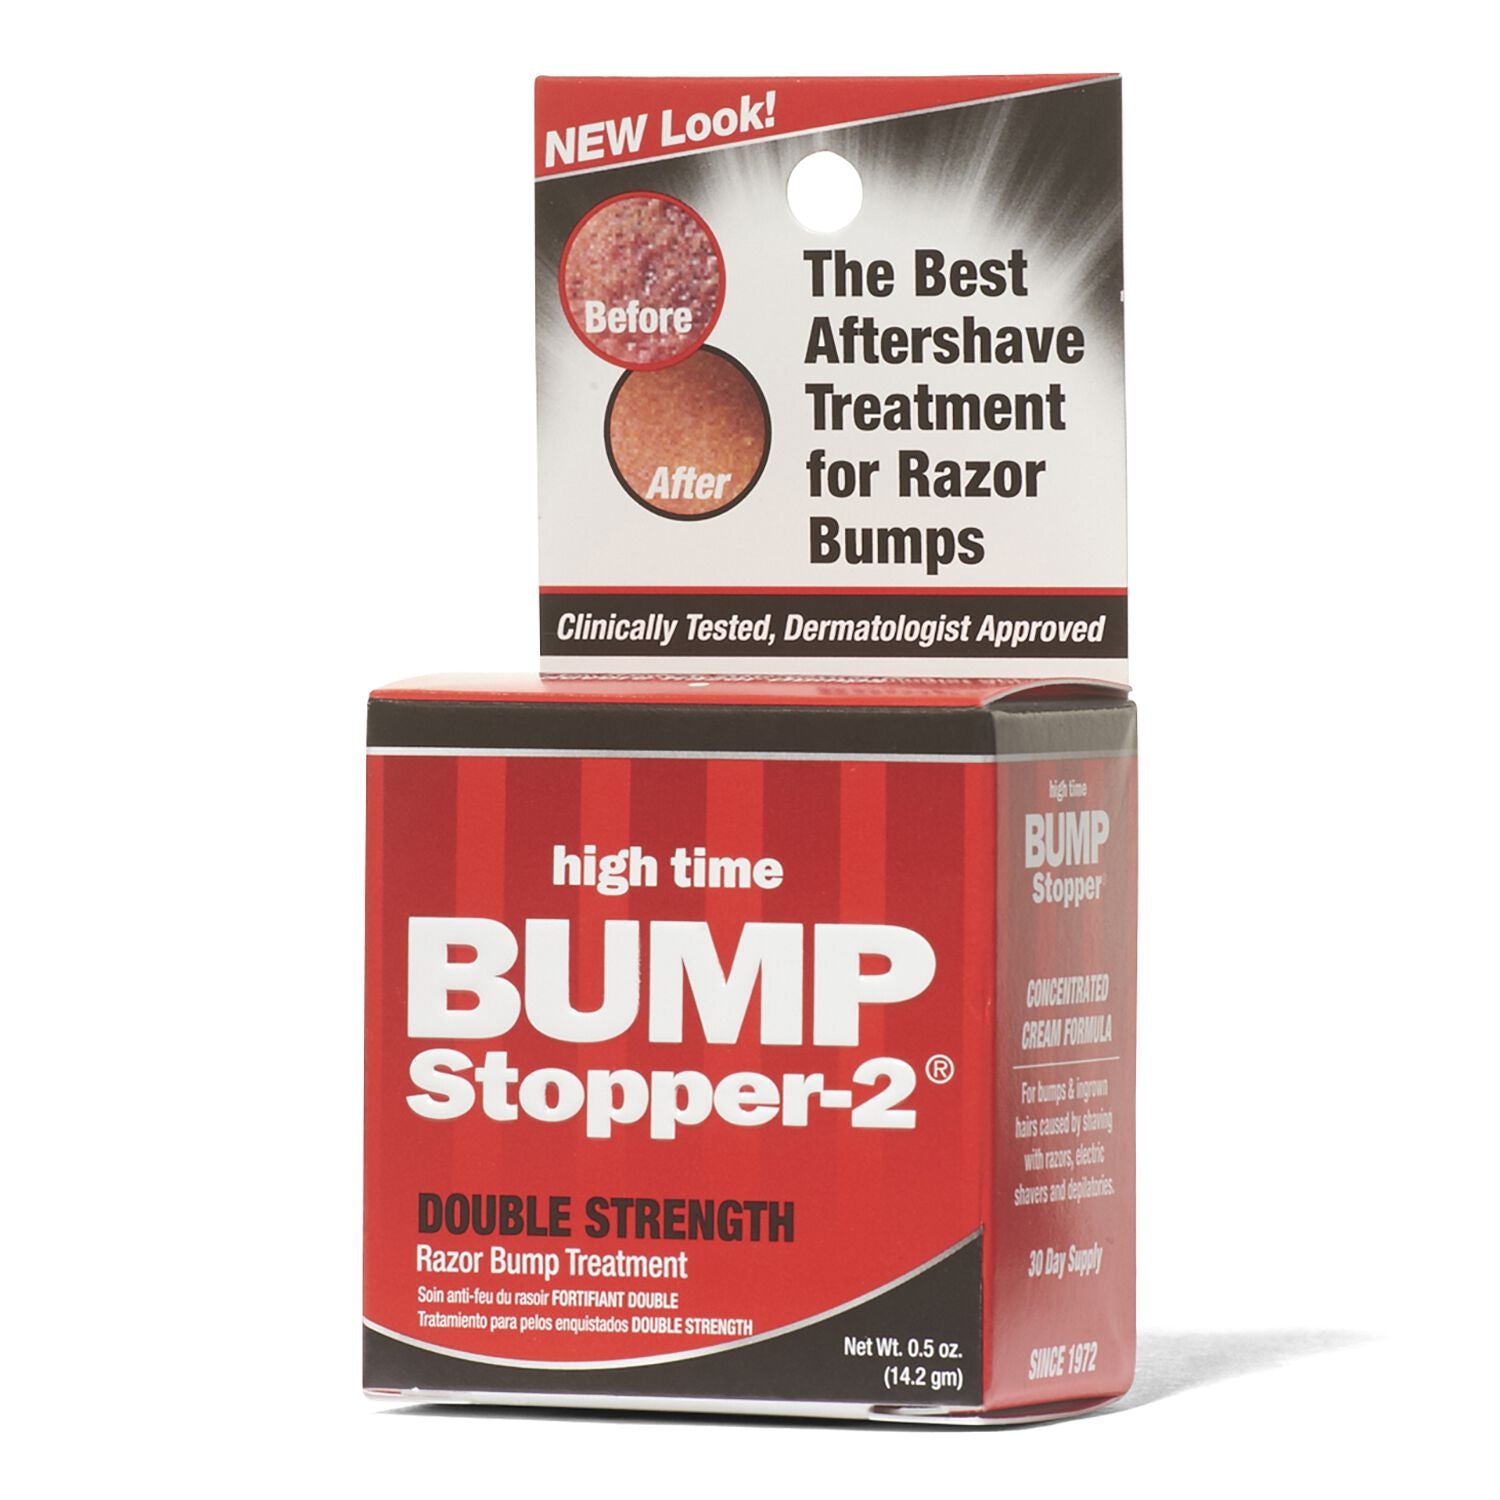 High Time Bump Stopper-2 Double Strength Treatment